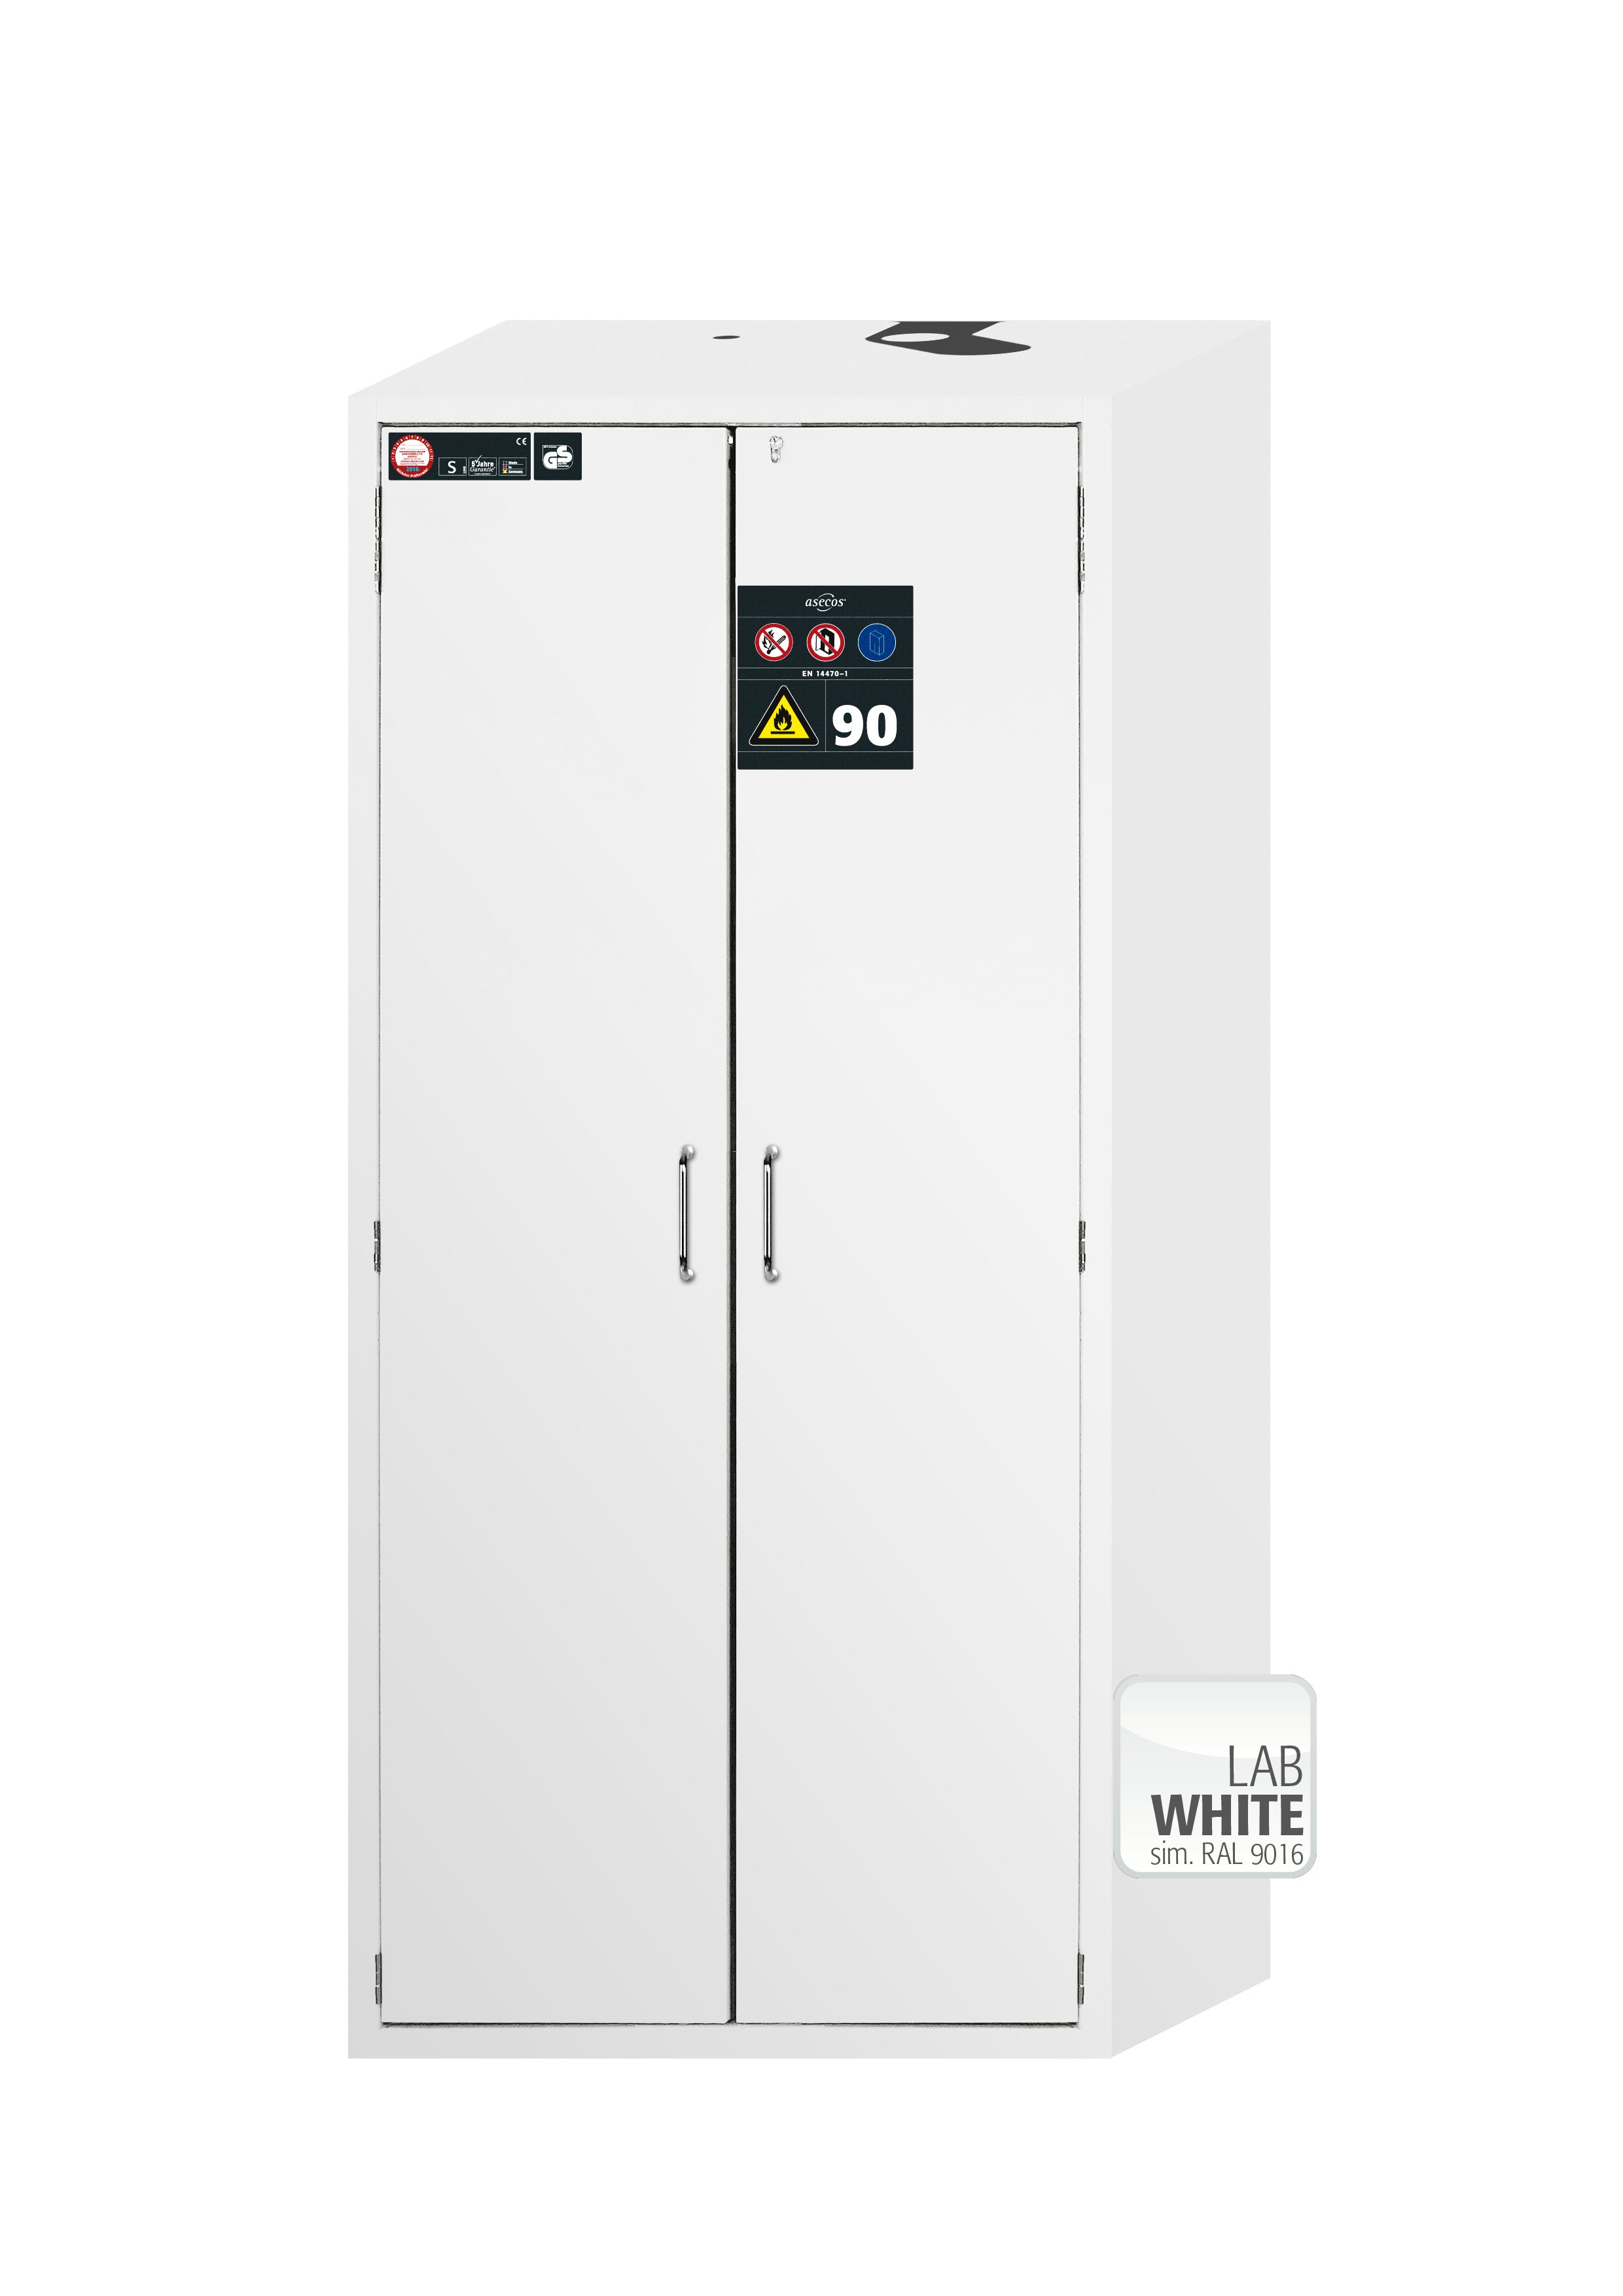 Type 90 safety cabinet S-CLASSIC-90 model S90.196.090.WDAS in laboratory white (similar to RAL 9016) with 6x standard pull-out tray (sheet steel)